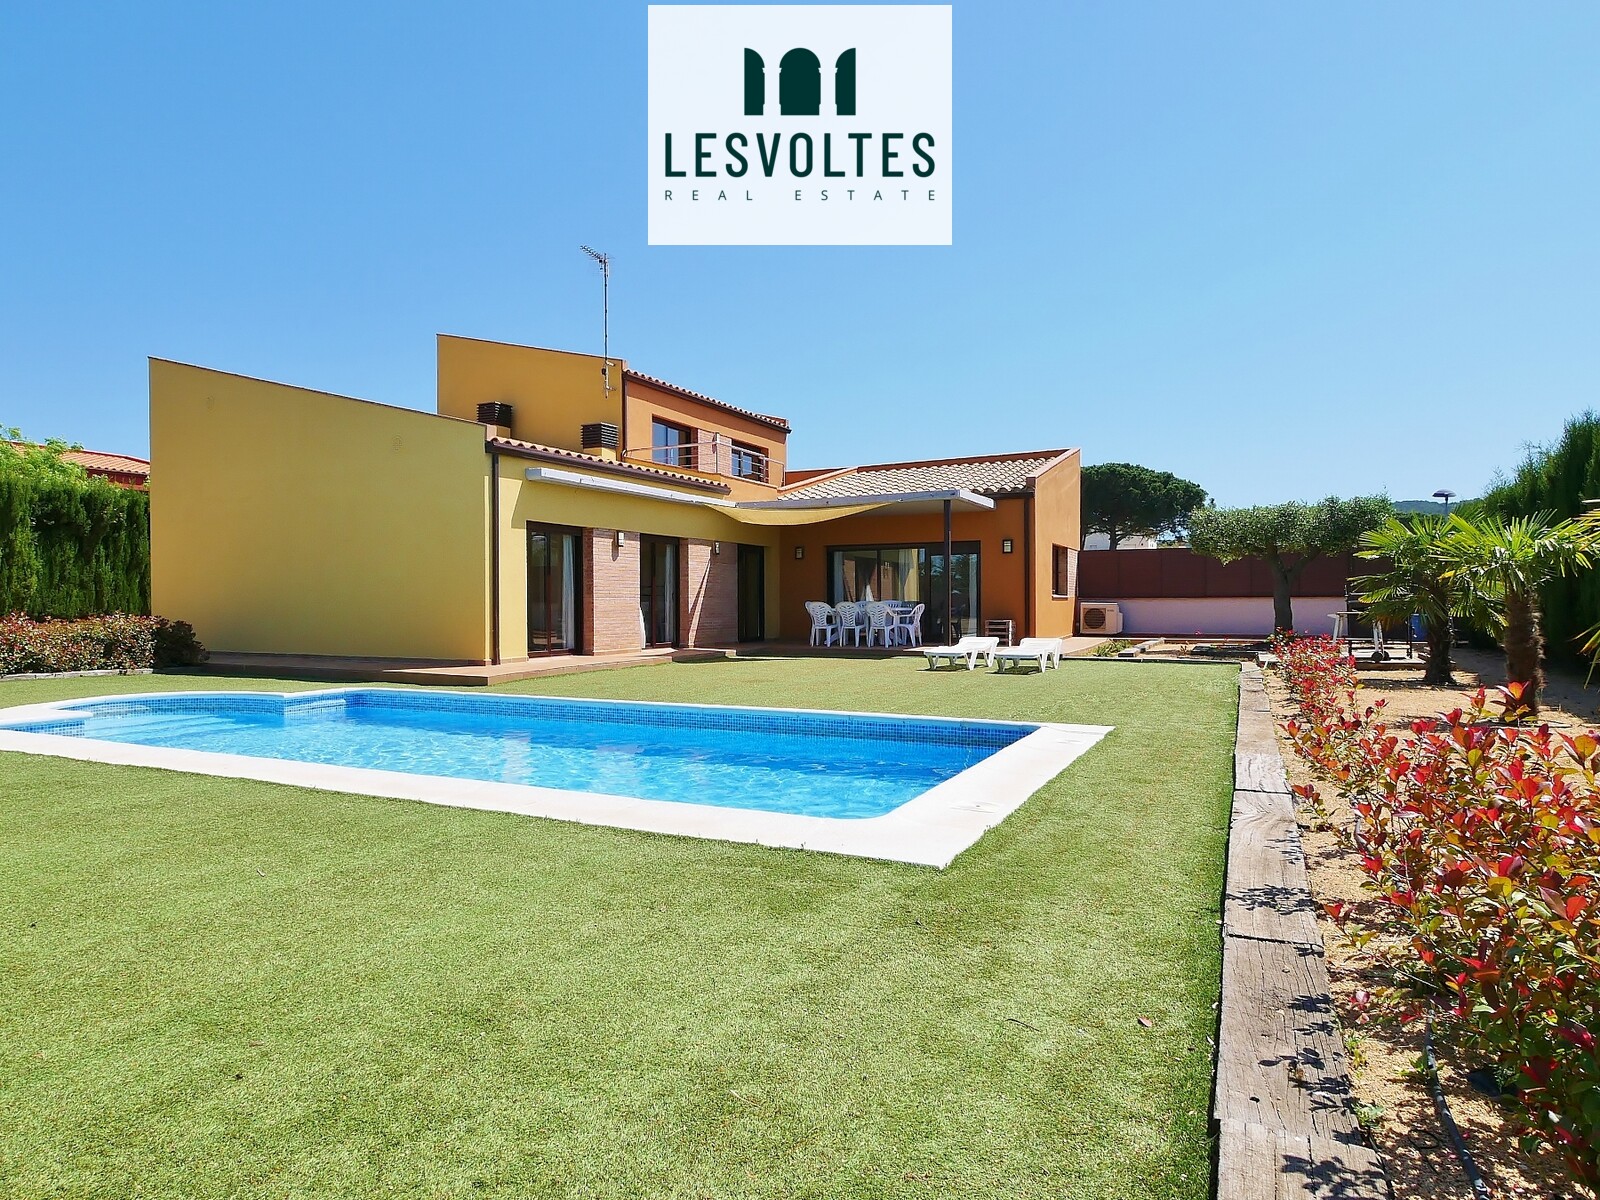 MAGNIFICENT HOUSE OF 300M2 WITH LARGE GARDEN AND SWIMMING POOL WITH VIEWS IN A PRIVILEGED RESIDENTIAL AREA IN THE BAIX EMPORD